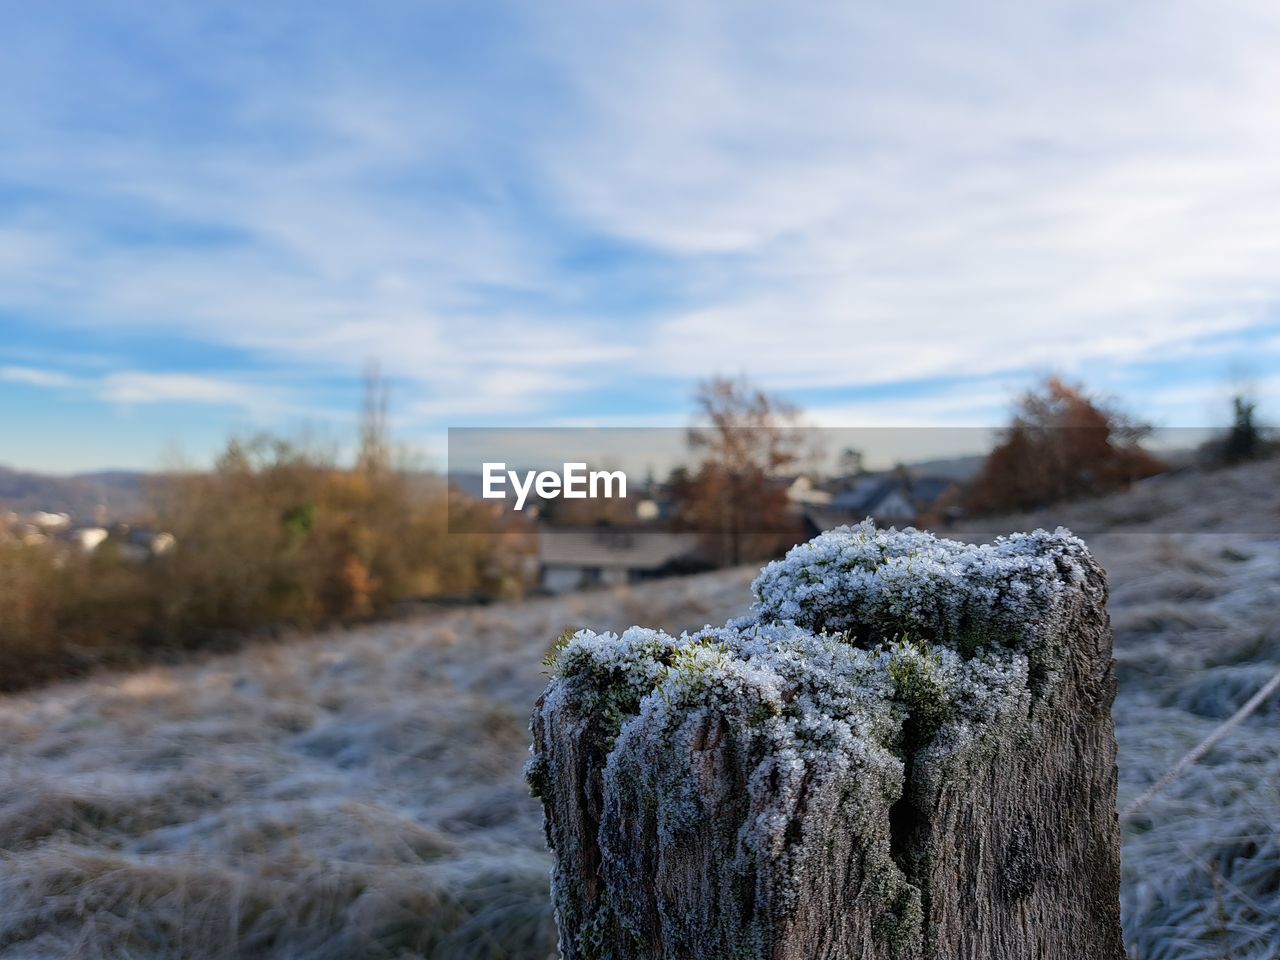 winter, nature, frost, snow, grass, plant, sky, tree, no people, cold temperature, focus on foreground, land, day, cloud, environment, landscape, tranquility, rock, rural area, wilderness, autumn, ice, freezing, scenics - nature, tranquil scene, beauty in nature, field, outdoors, frozen, growth, non-urban scene, natural environment